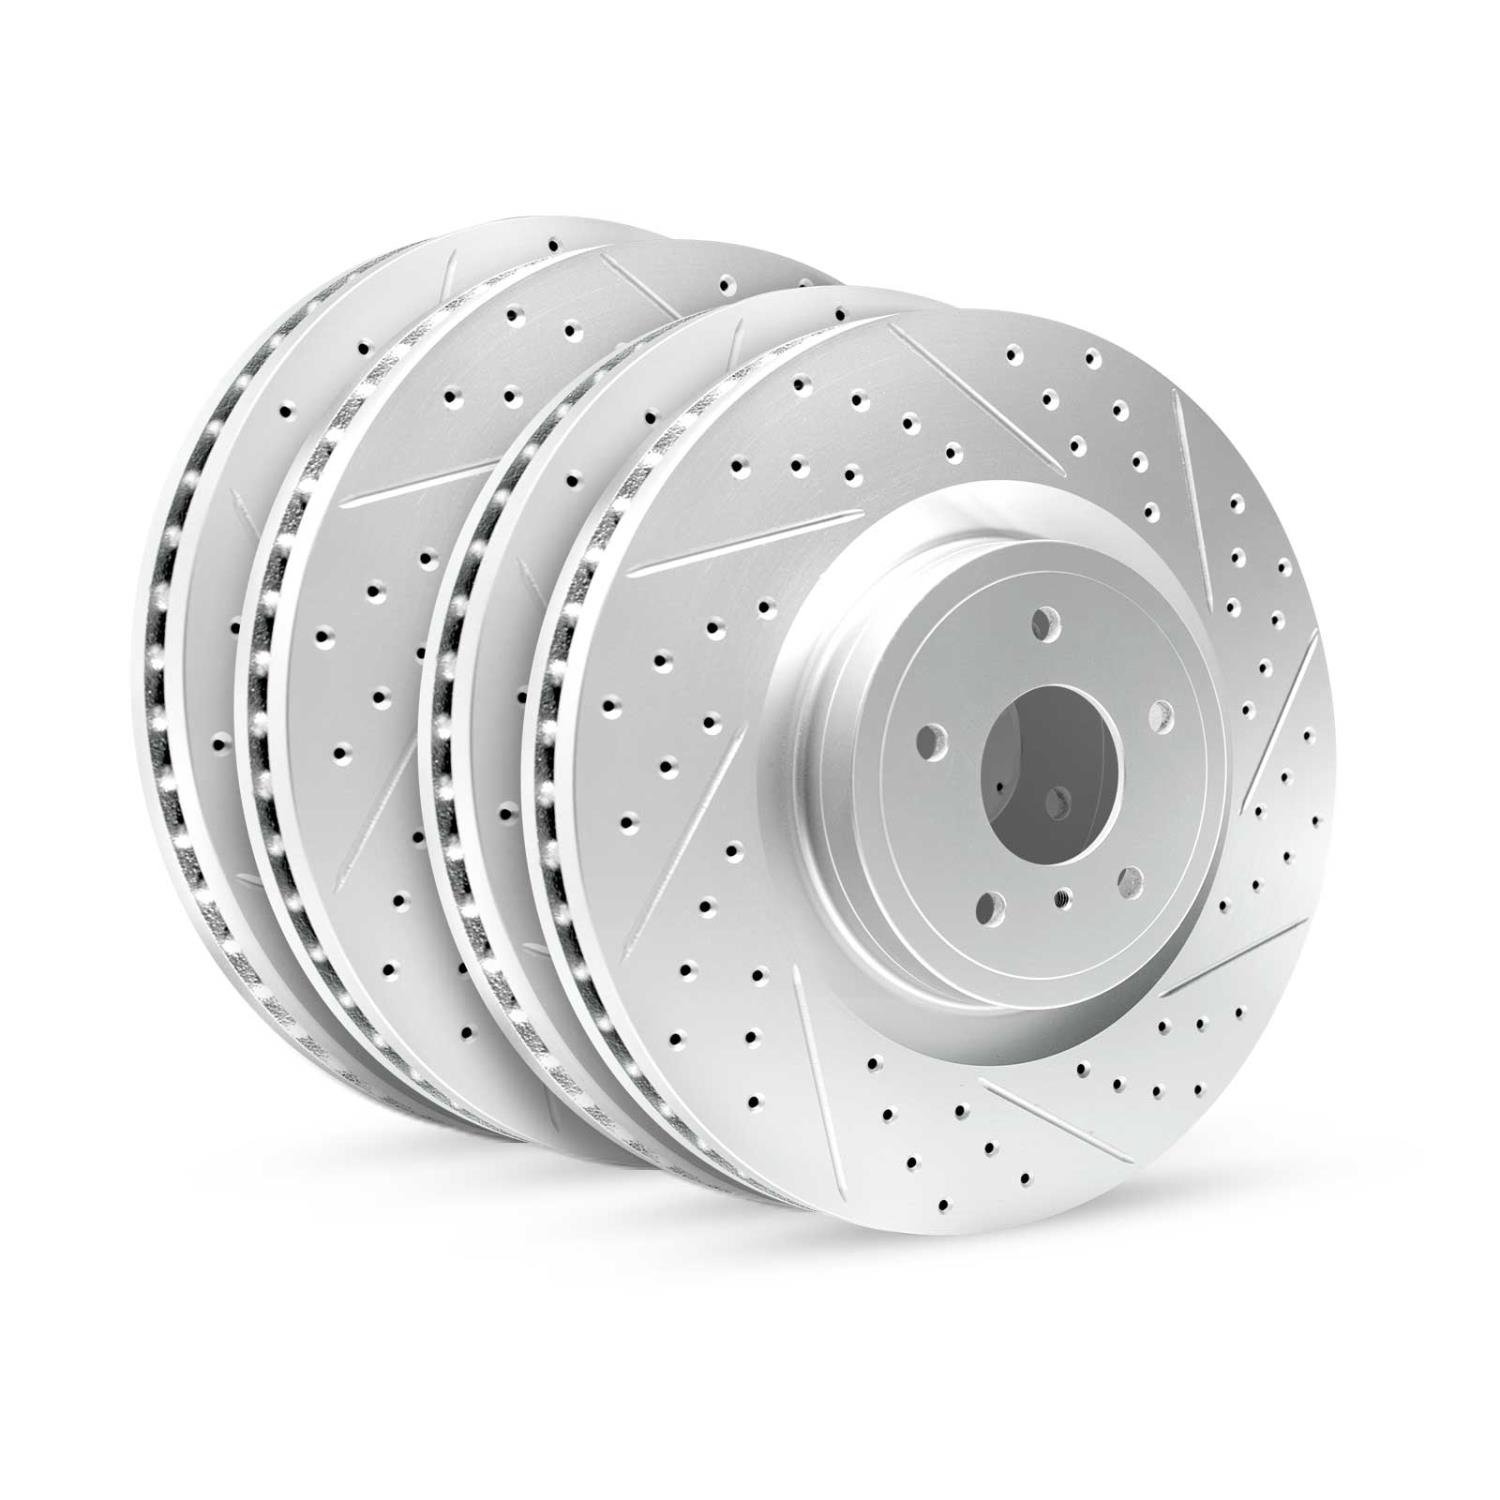 GEO-Carbon Drilled/Slotted Rotors, 2015-2019 Fits Multiple